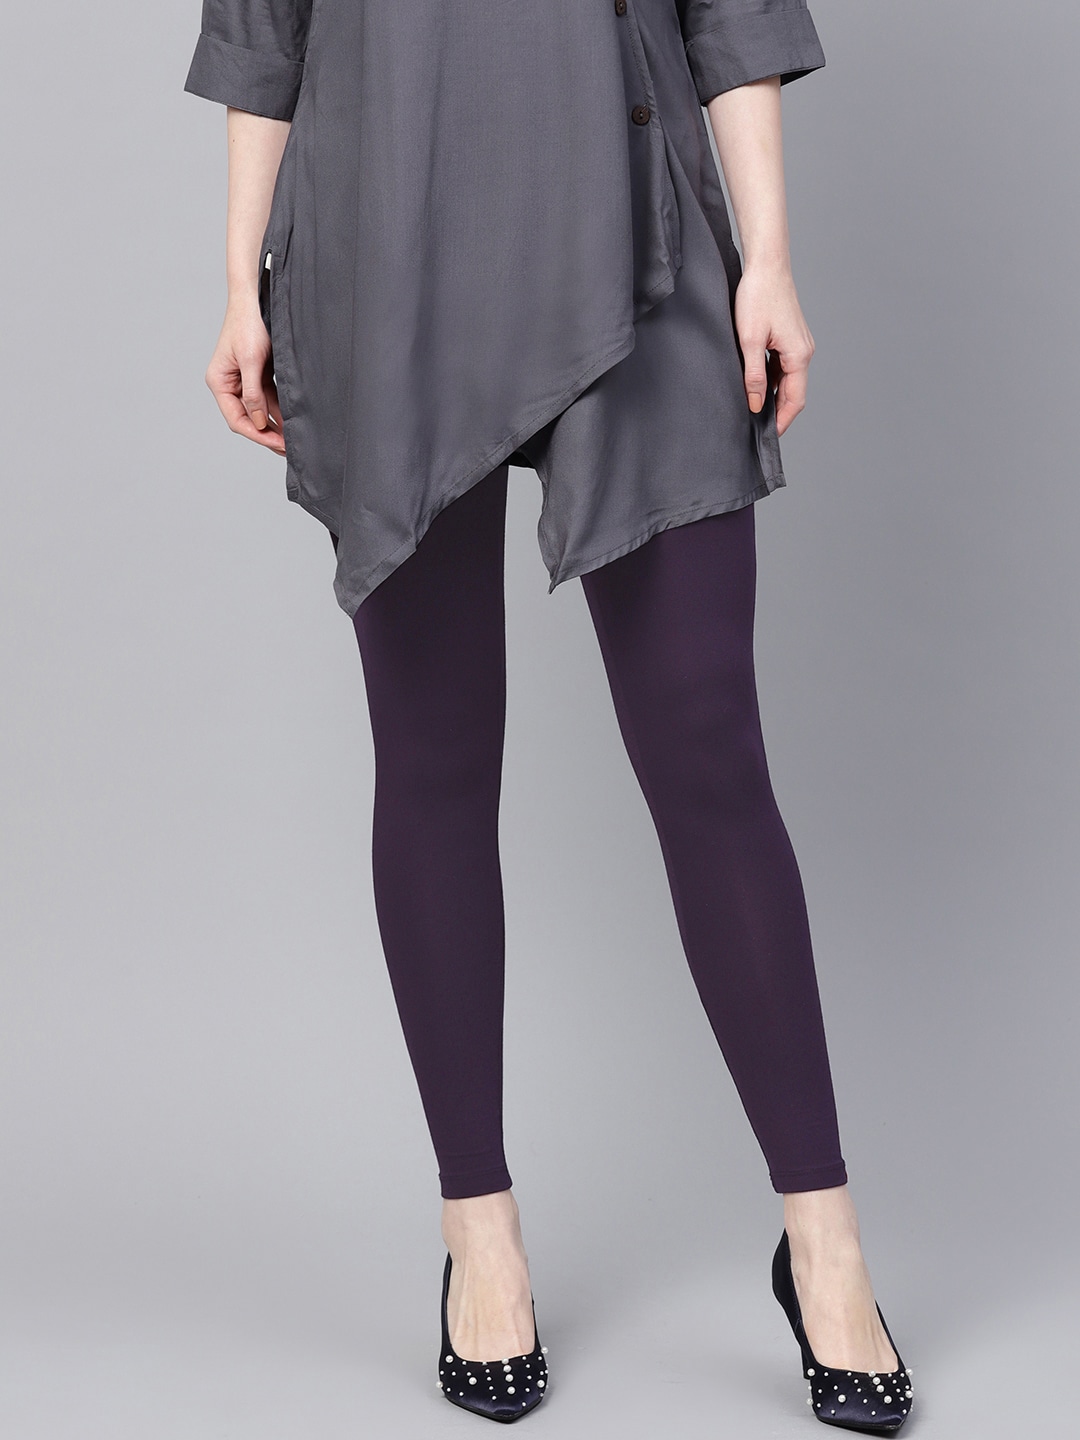 W Women Aubergine Solid Ankle-Length Leggings Price in India